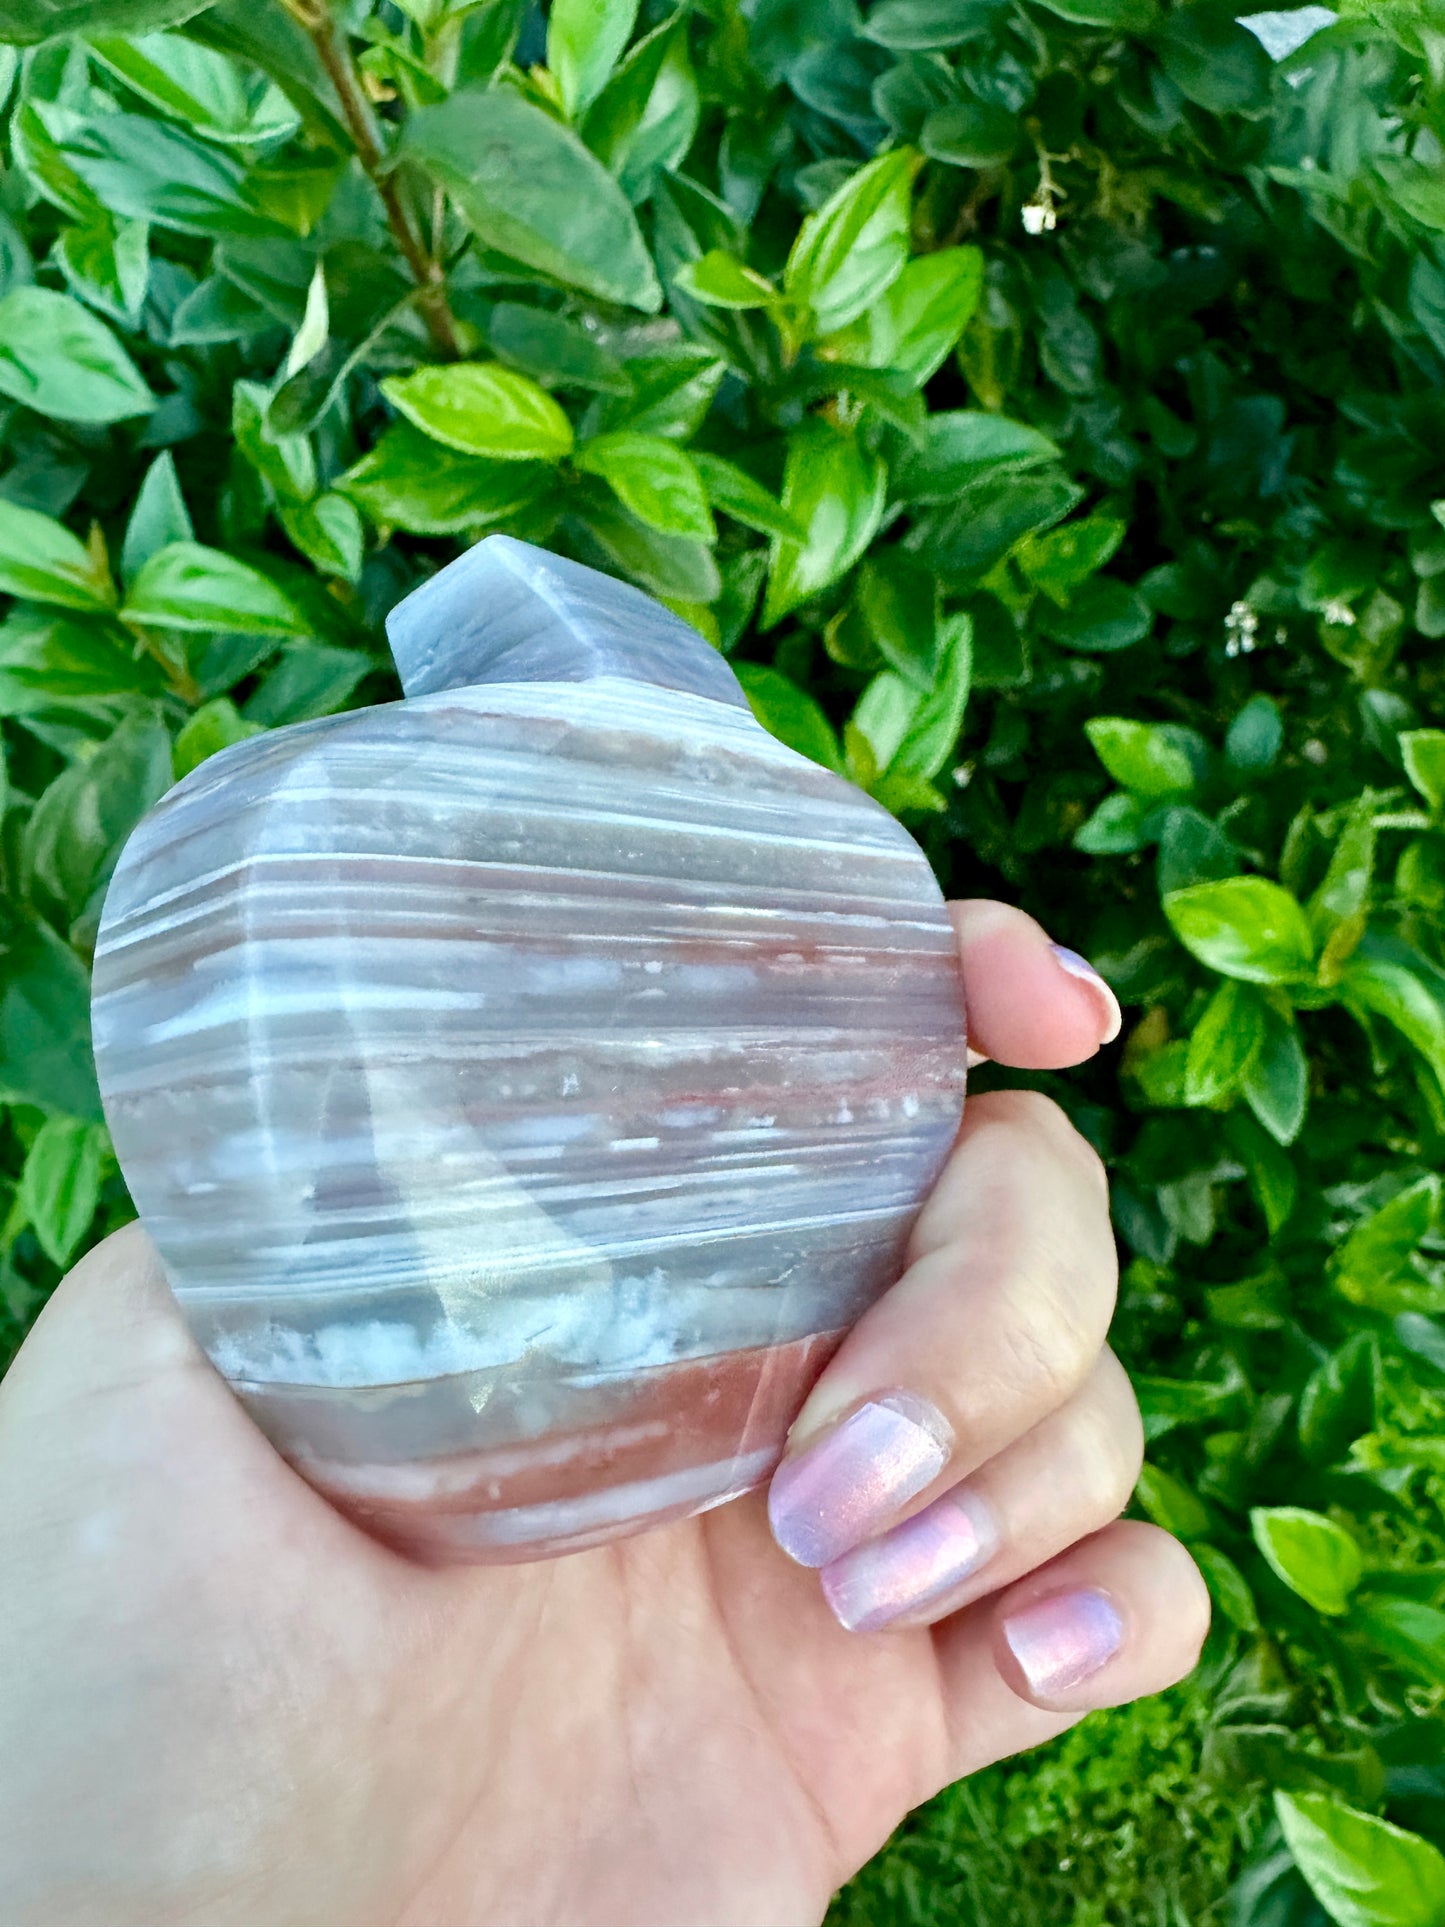 Stunning Banded Agate Apple Bowl - Perfect for Home Decor, Unique Gift Idea, Natural Stone Fruit Bowl, Elegant Centerpiece